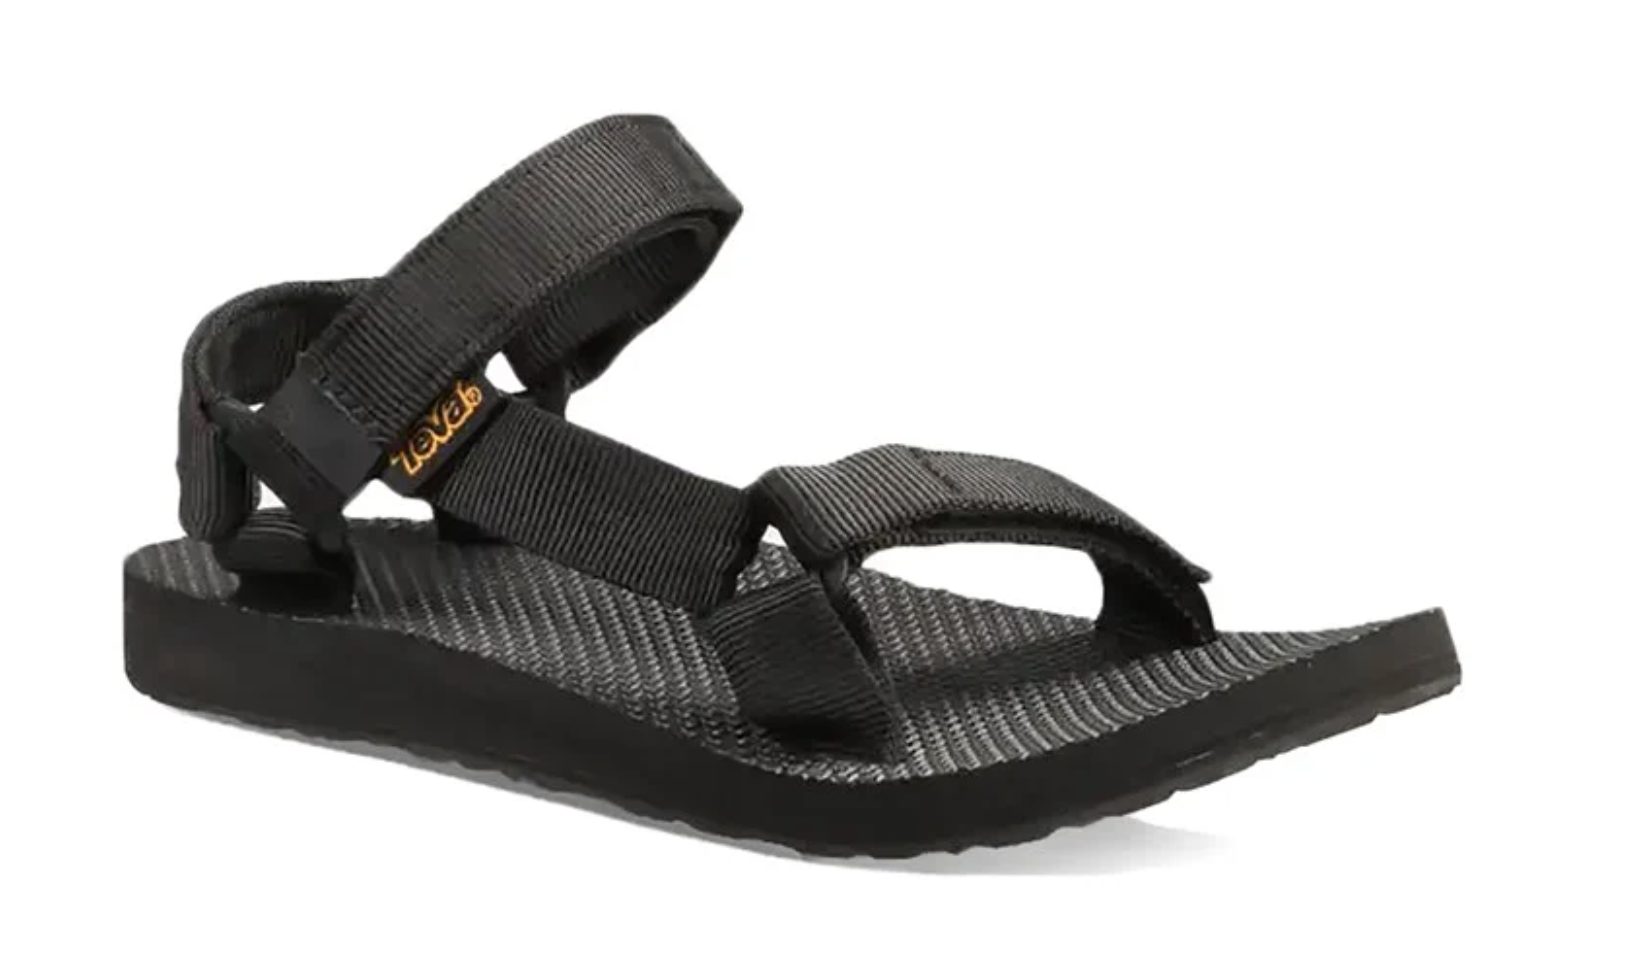 The Best Hiking Sandals of 2023 | The Inertia